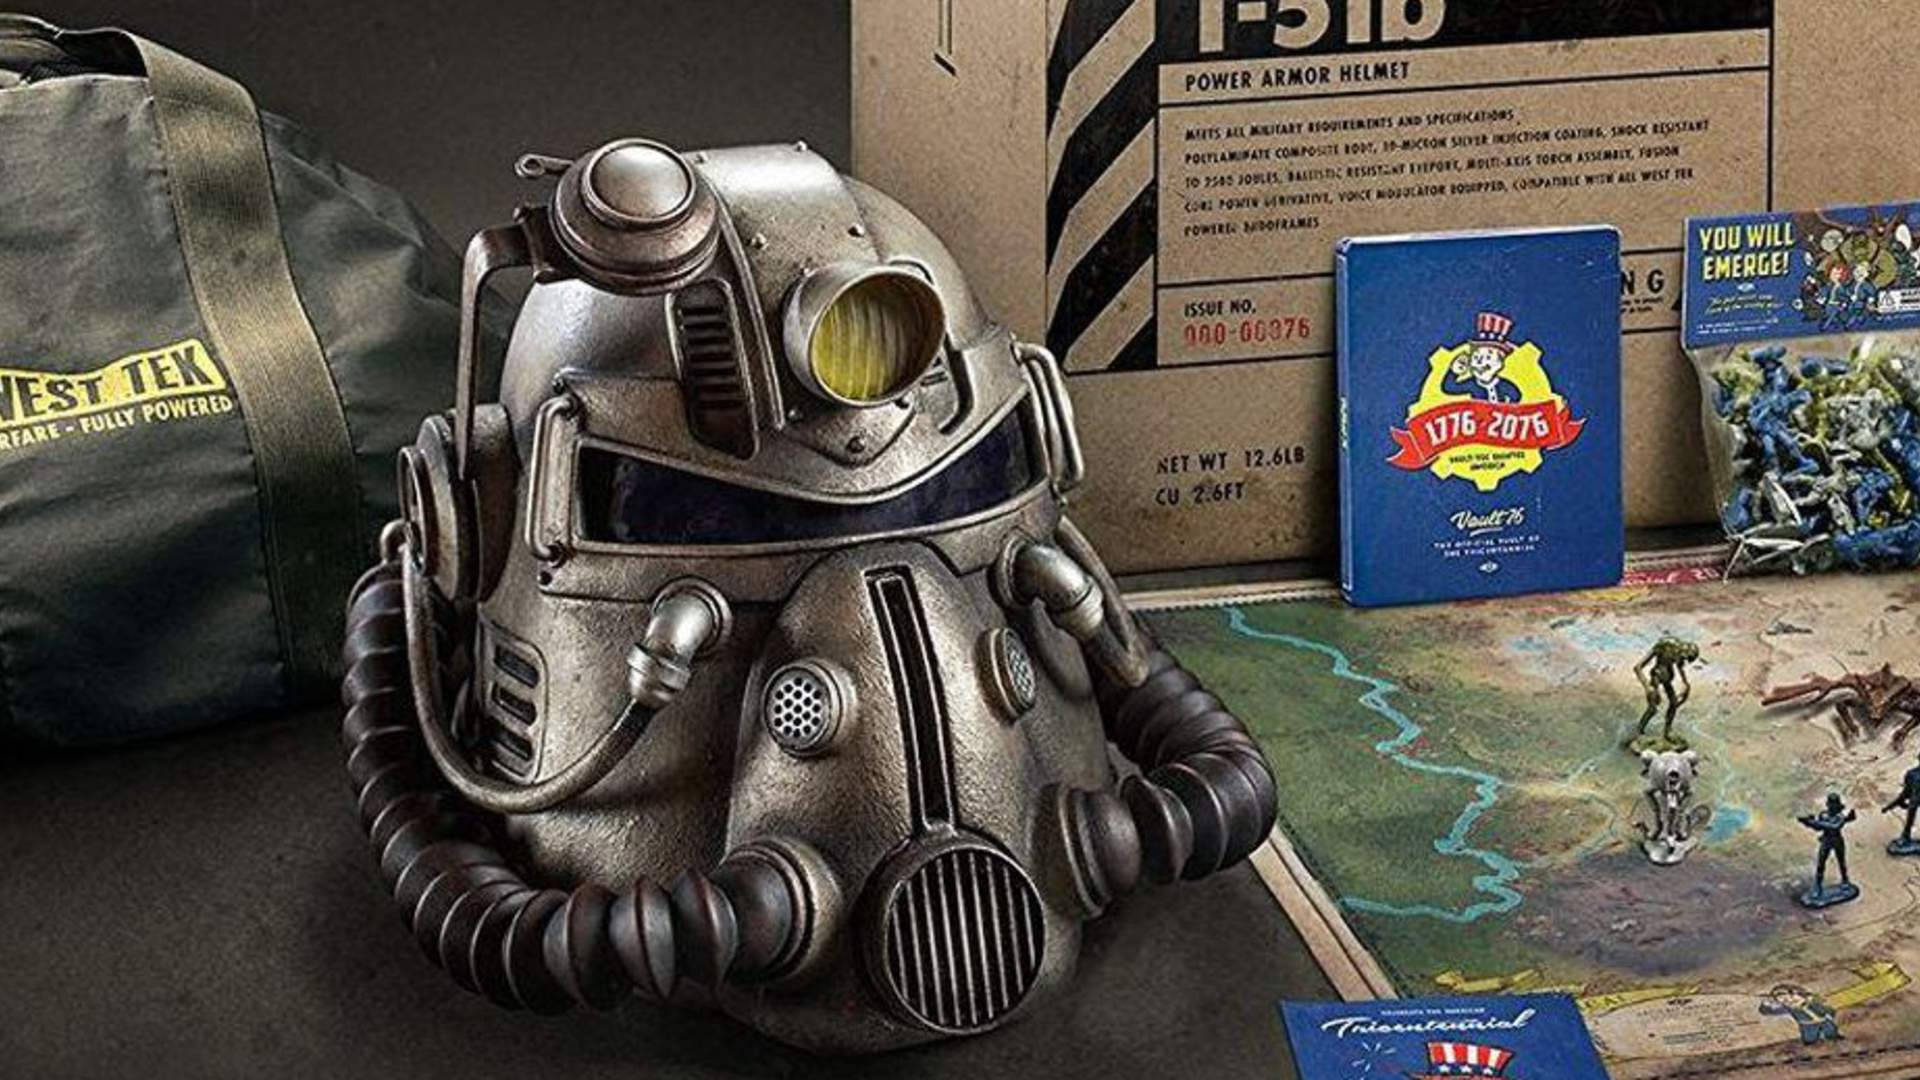 Fallout 76 Helmet In Table Background